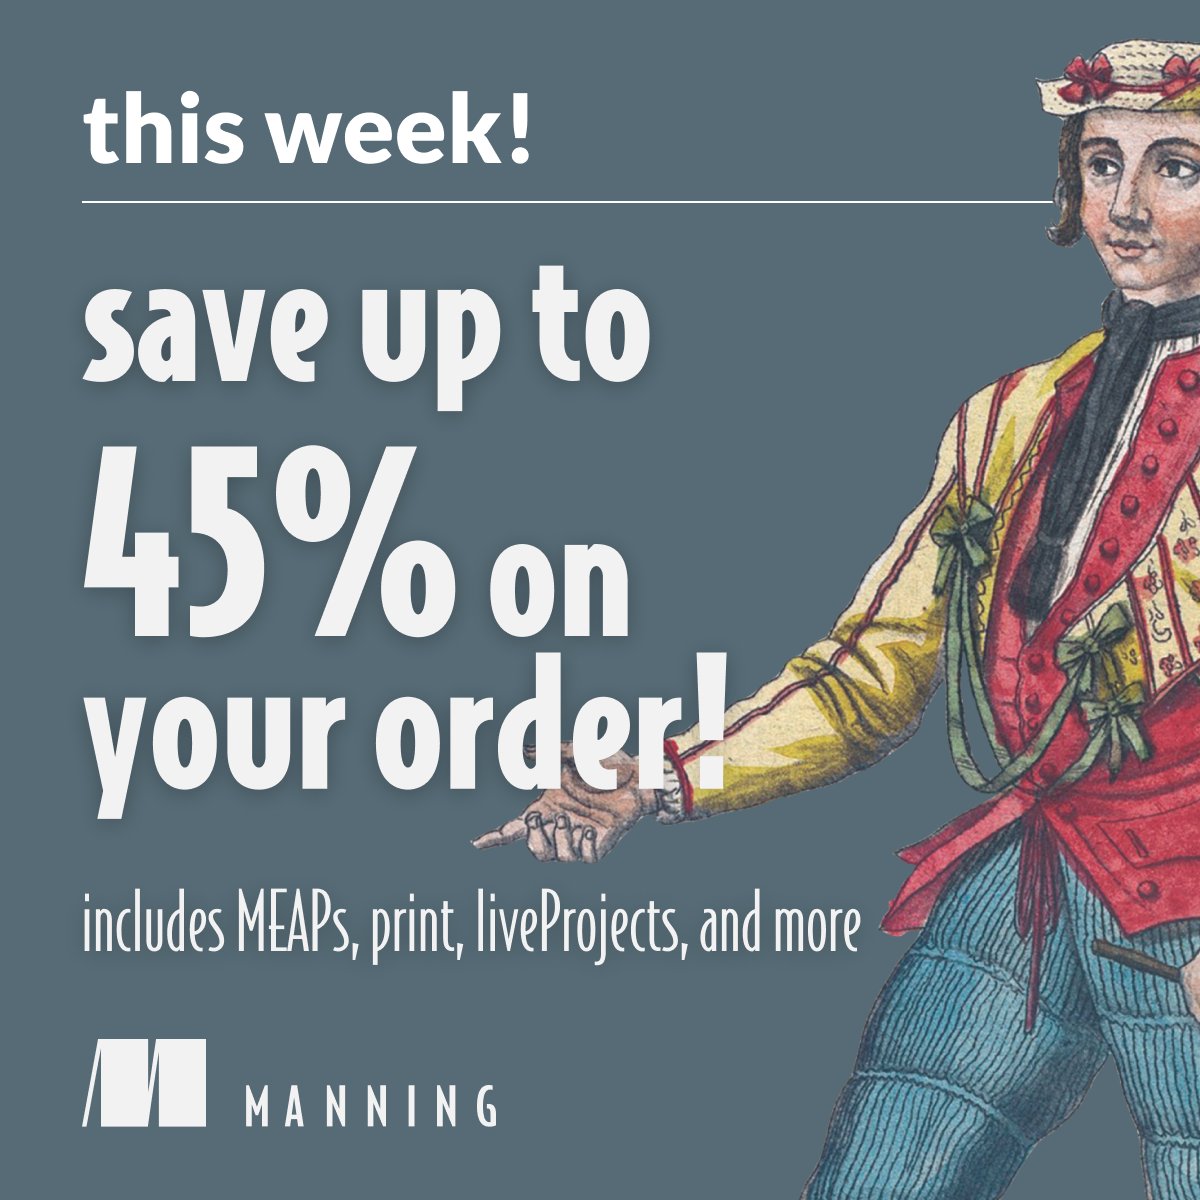 🌟 THIS WEEK - Save up to 45% on your order! 🌟

Save 32% on purchases under $50. Save 39% when you spend $50 or more. Save 45% when you spend $100 or more.

Only at mng.bz/aE0X

#ManningBooks #LearnwithManning